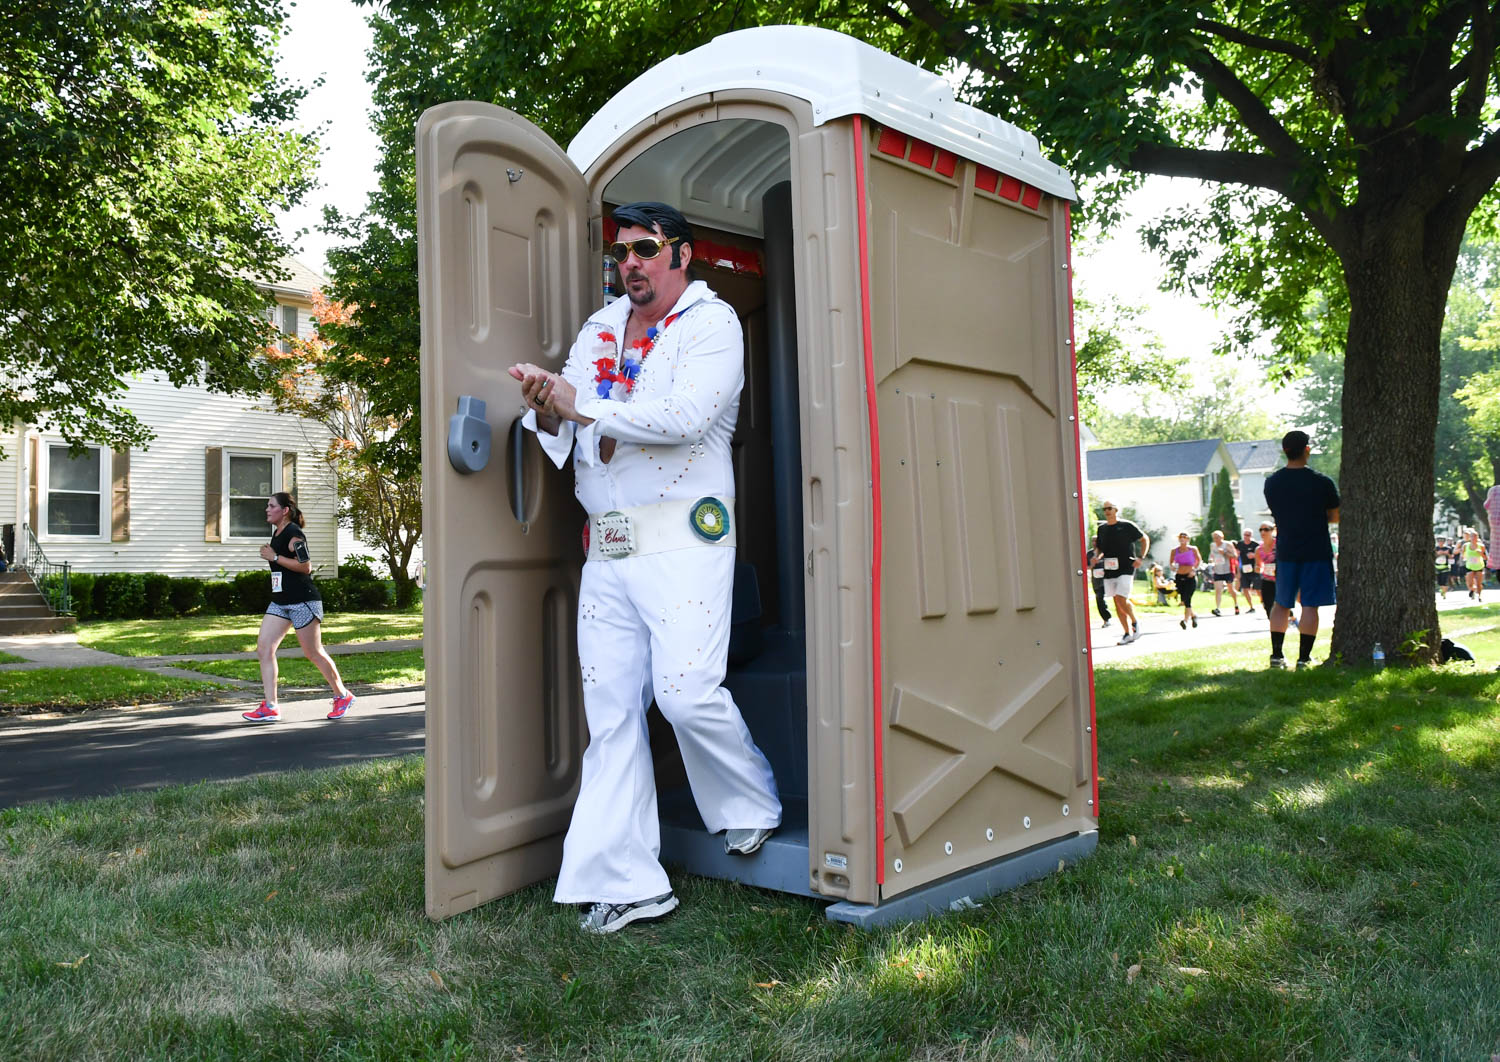 Running Elvis Scott Cullen, of Taylor Ridge, survives the port-a-potty along Kirkwood Blvd. during the Quad-City Times Bix 7 Saturday, July 28, 2018 in Davenport, Iowa. Upon exiting the port-a-potty Cullen quipped "Wow. I smells like something died in there." (Todd Mizener - Dispatch/Argus) 